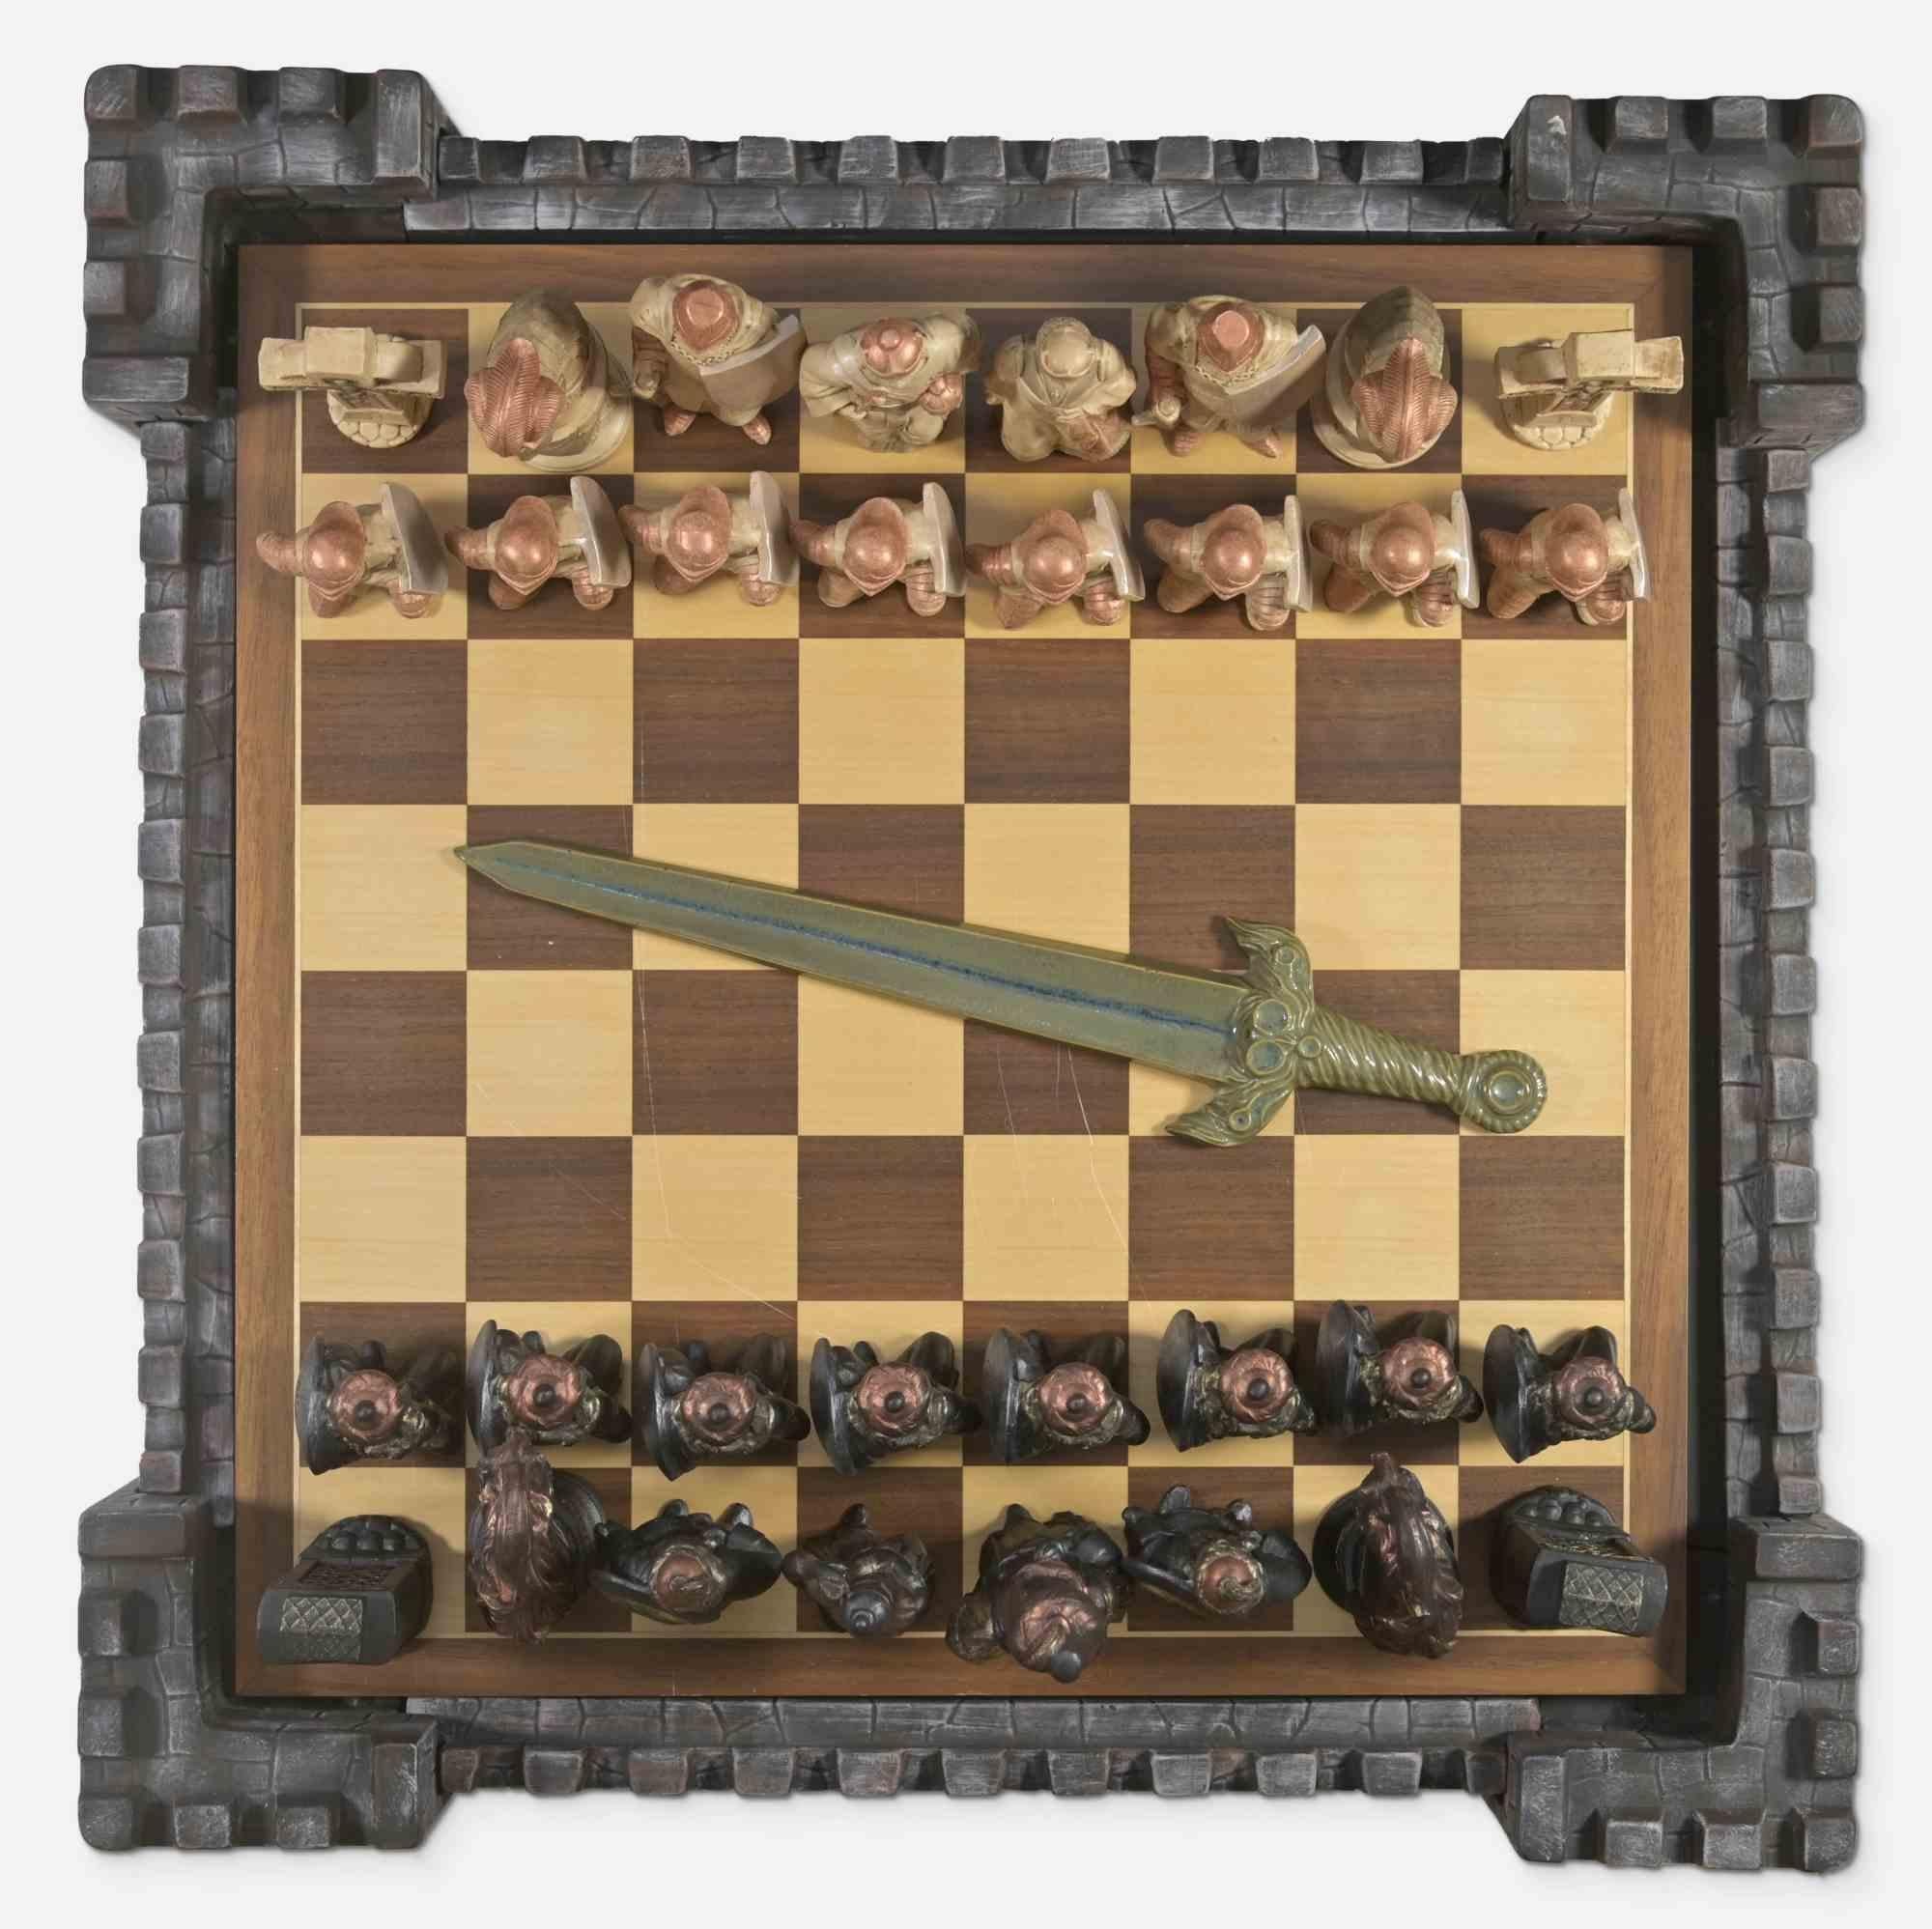 This Ceramic Medieval Chess is a ceramic chess set consisting of medieval characters and a wooden chessboard. 

Dimensions: cm 26 x 60 x 60.

Good conditions.

The shape of the set reminds an ancient medieval castle.

If you are fascinated by